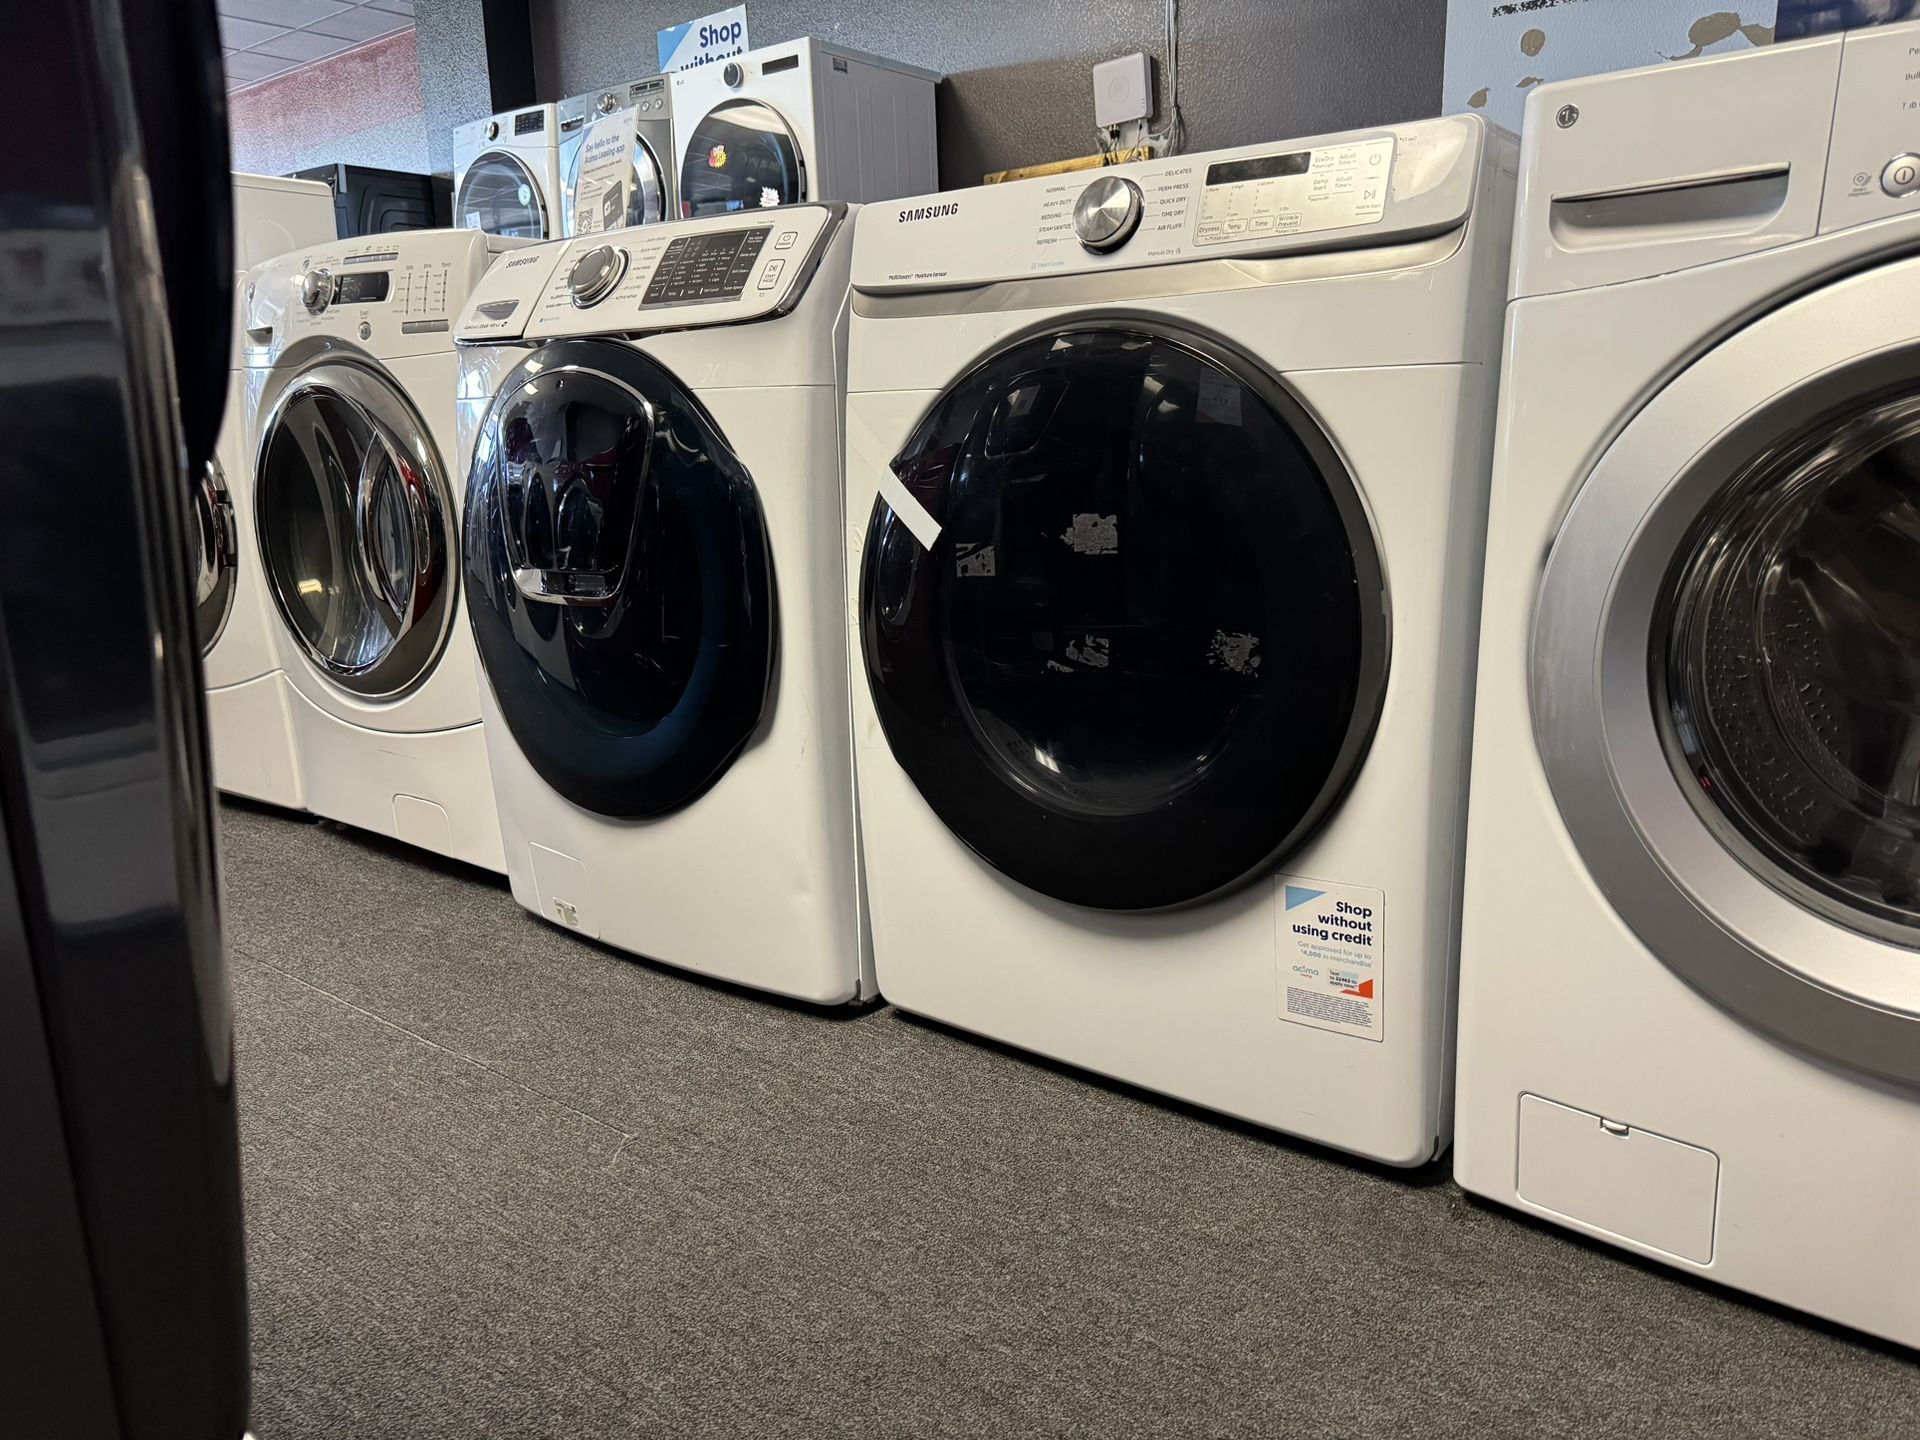 Beautiful Samsung Washer And Electric Dryer Set 